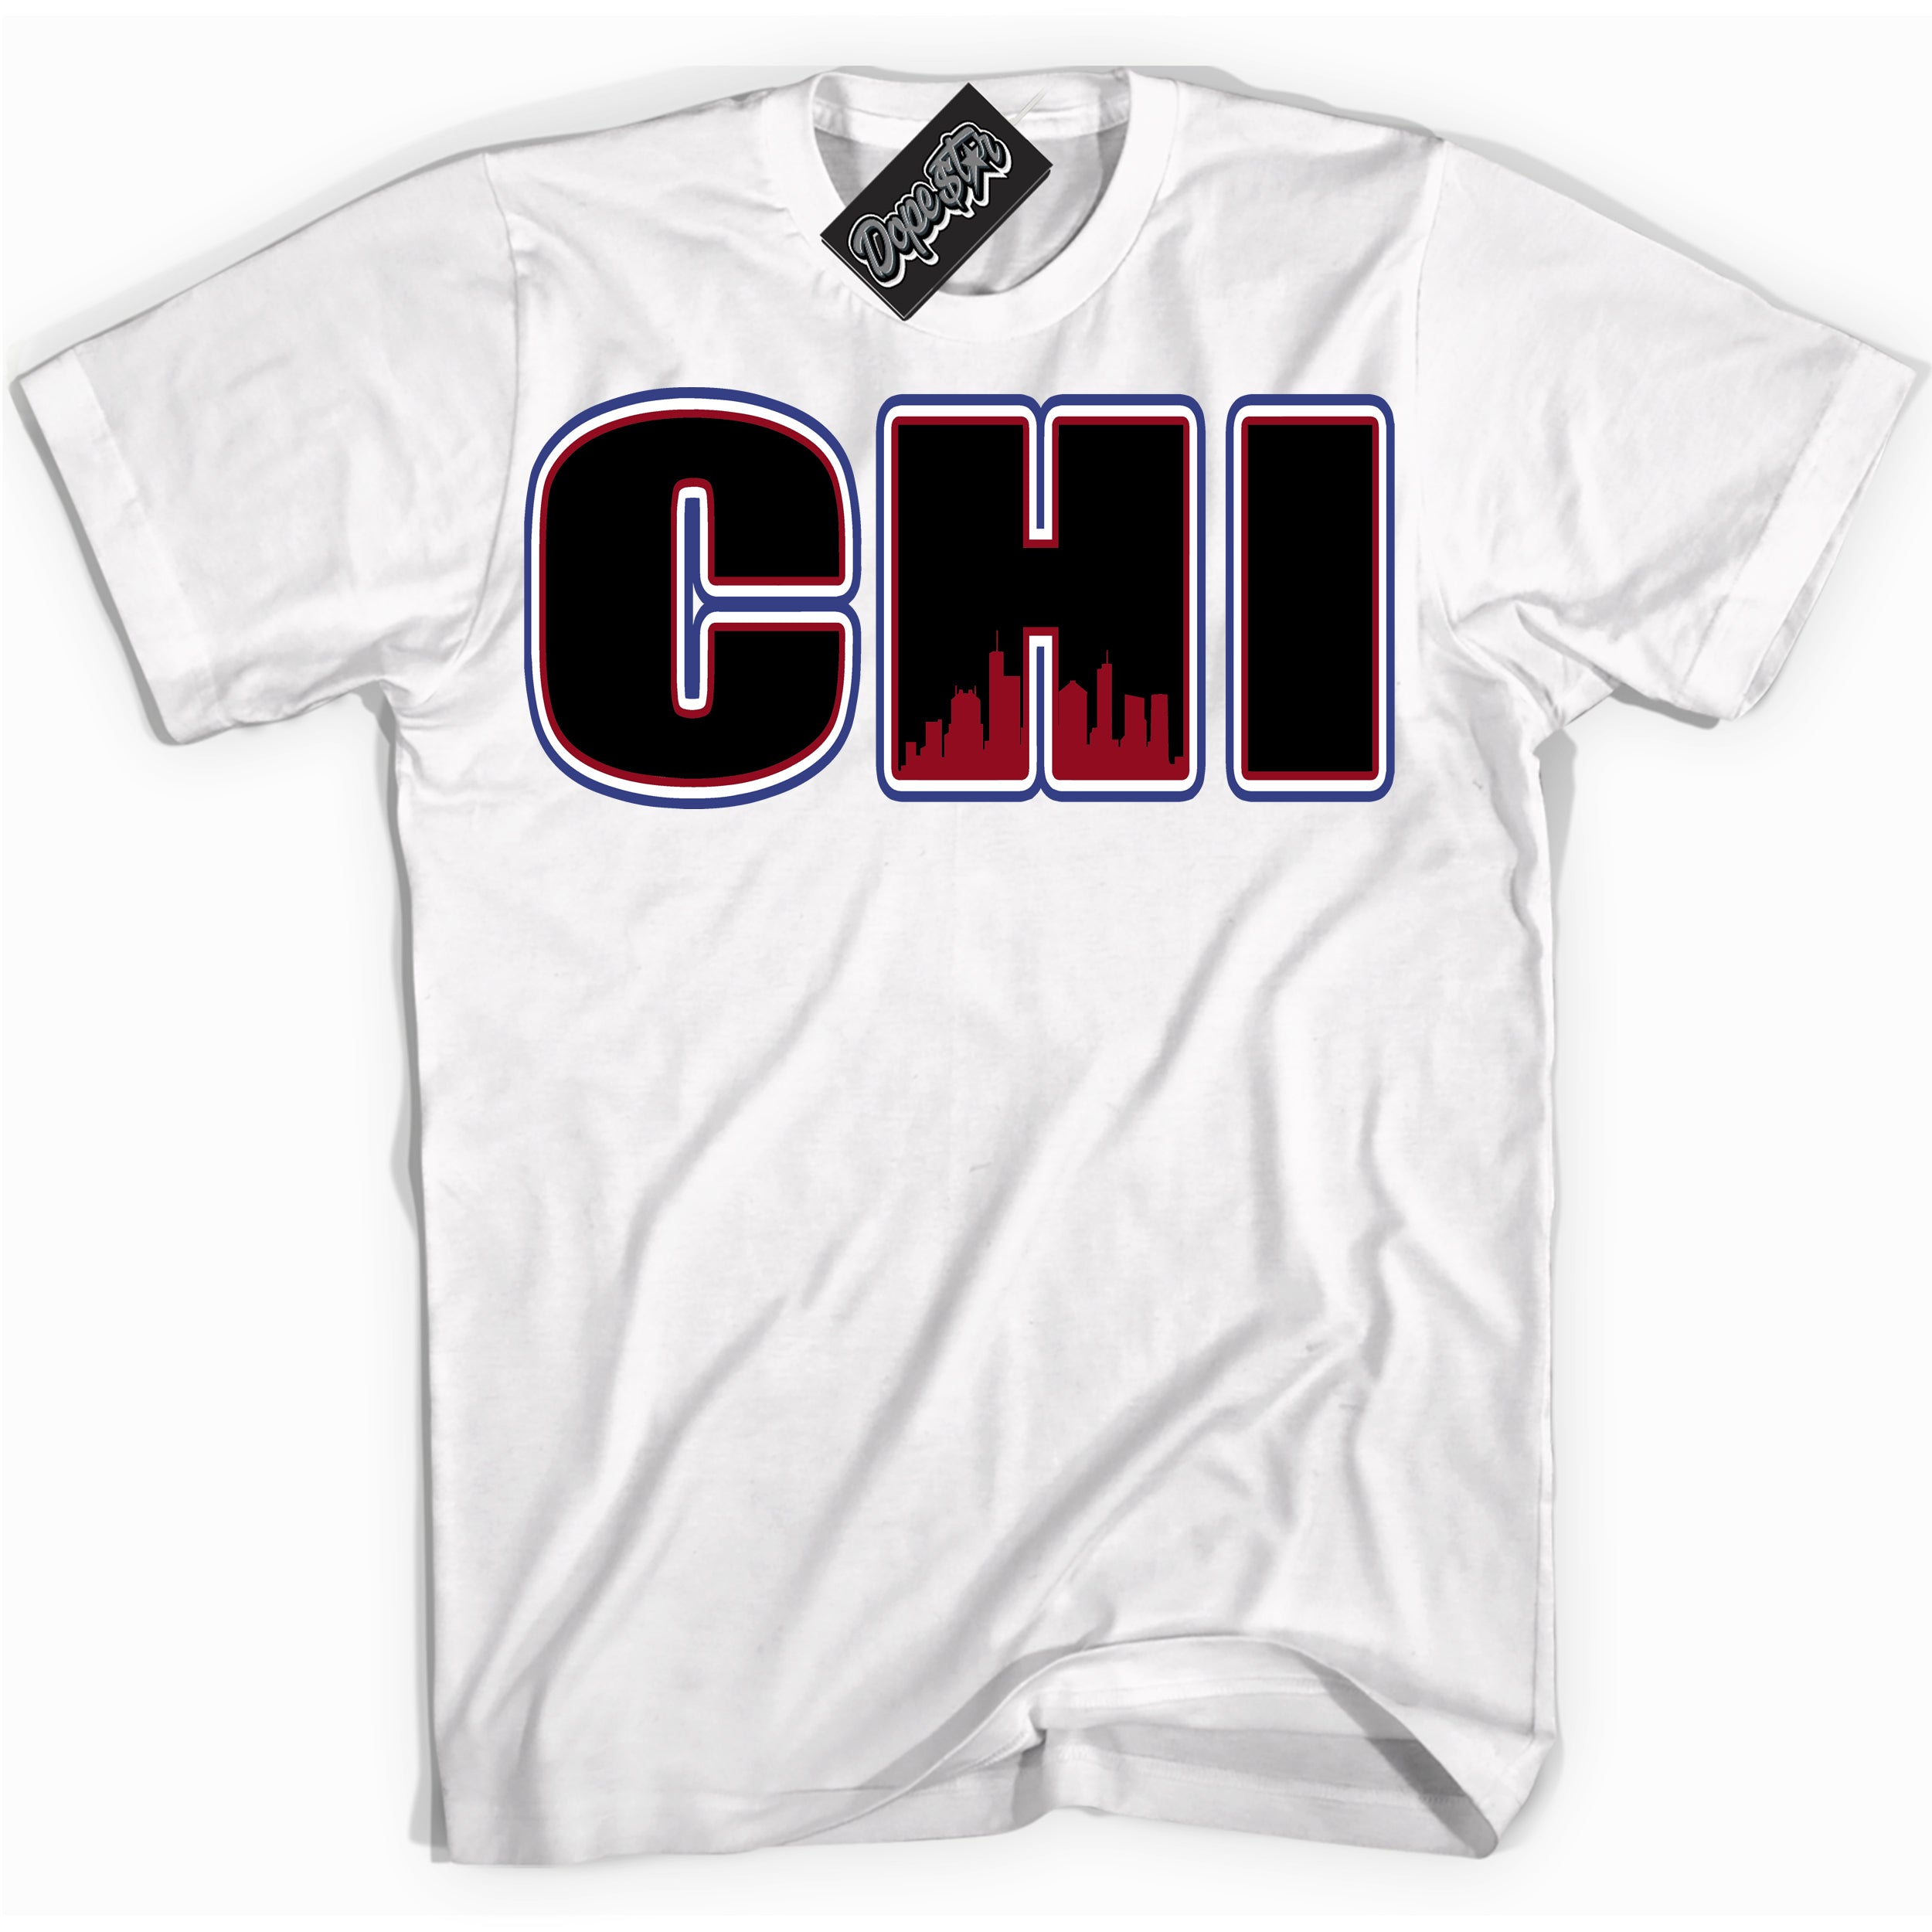 Cool White Shirt with “ Chicago ” design that perfectly matches Playoffs 8s Sneakers.